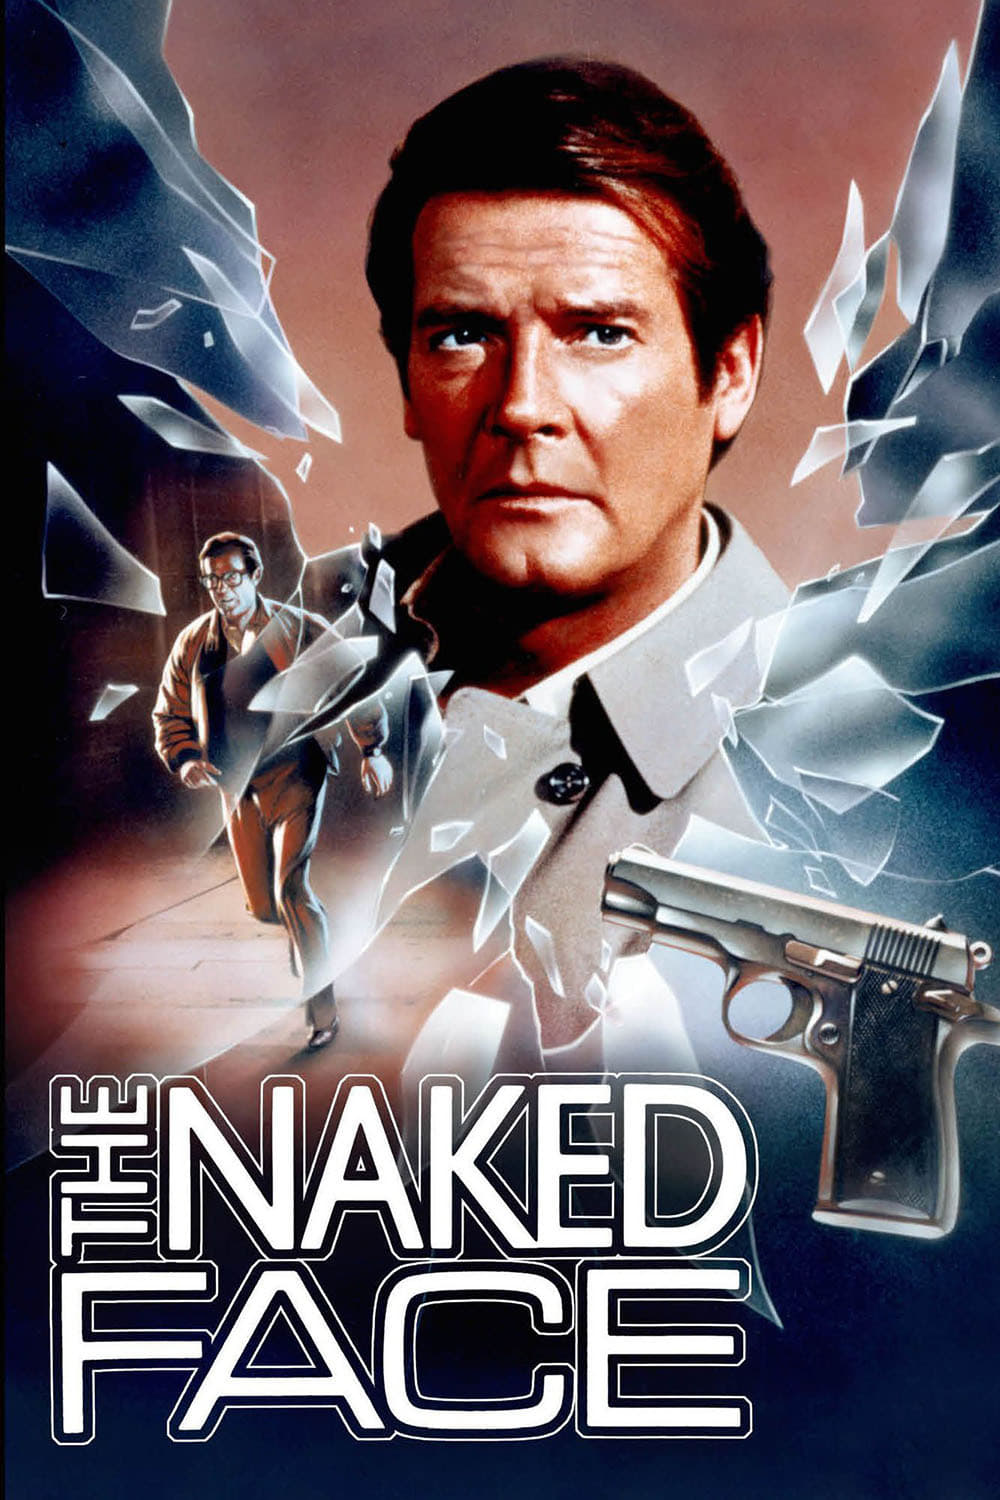 The Naked Face (1984)